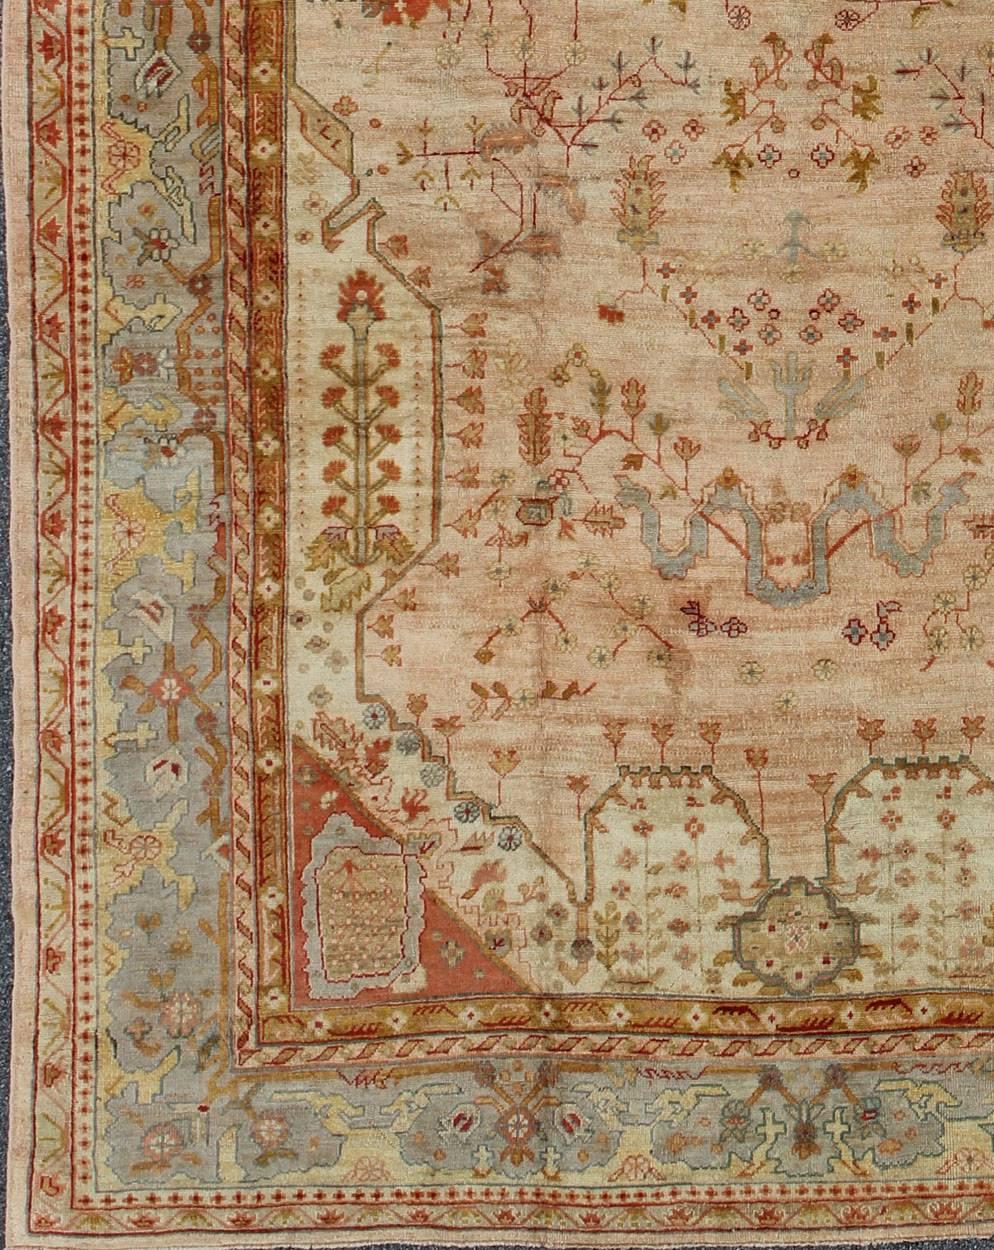 Unique Turkish Oushak rug with Sub-geometric and floral design in pink, blue, light gray, tan, light green, taupe, red, yellow and yellow green. rug S12-1213, country of origin / type: Turkey / Oushak, circa 1900

Measures: 11'3 x 16'8

The design